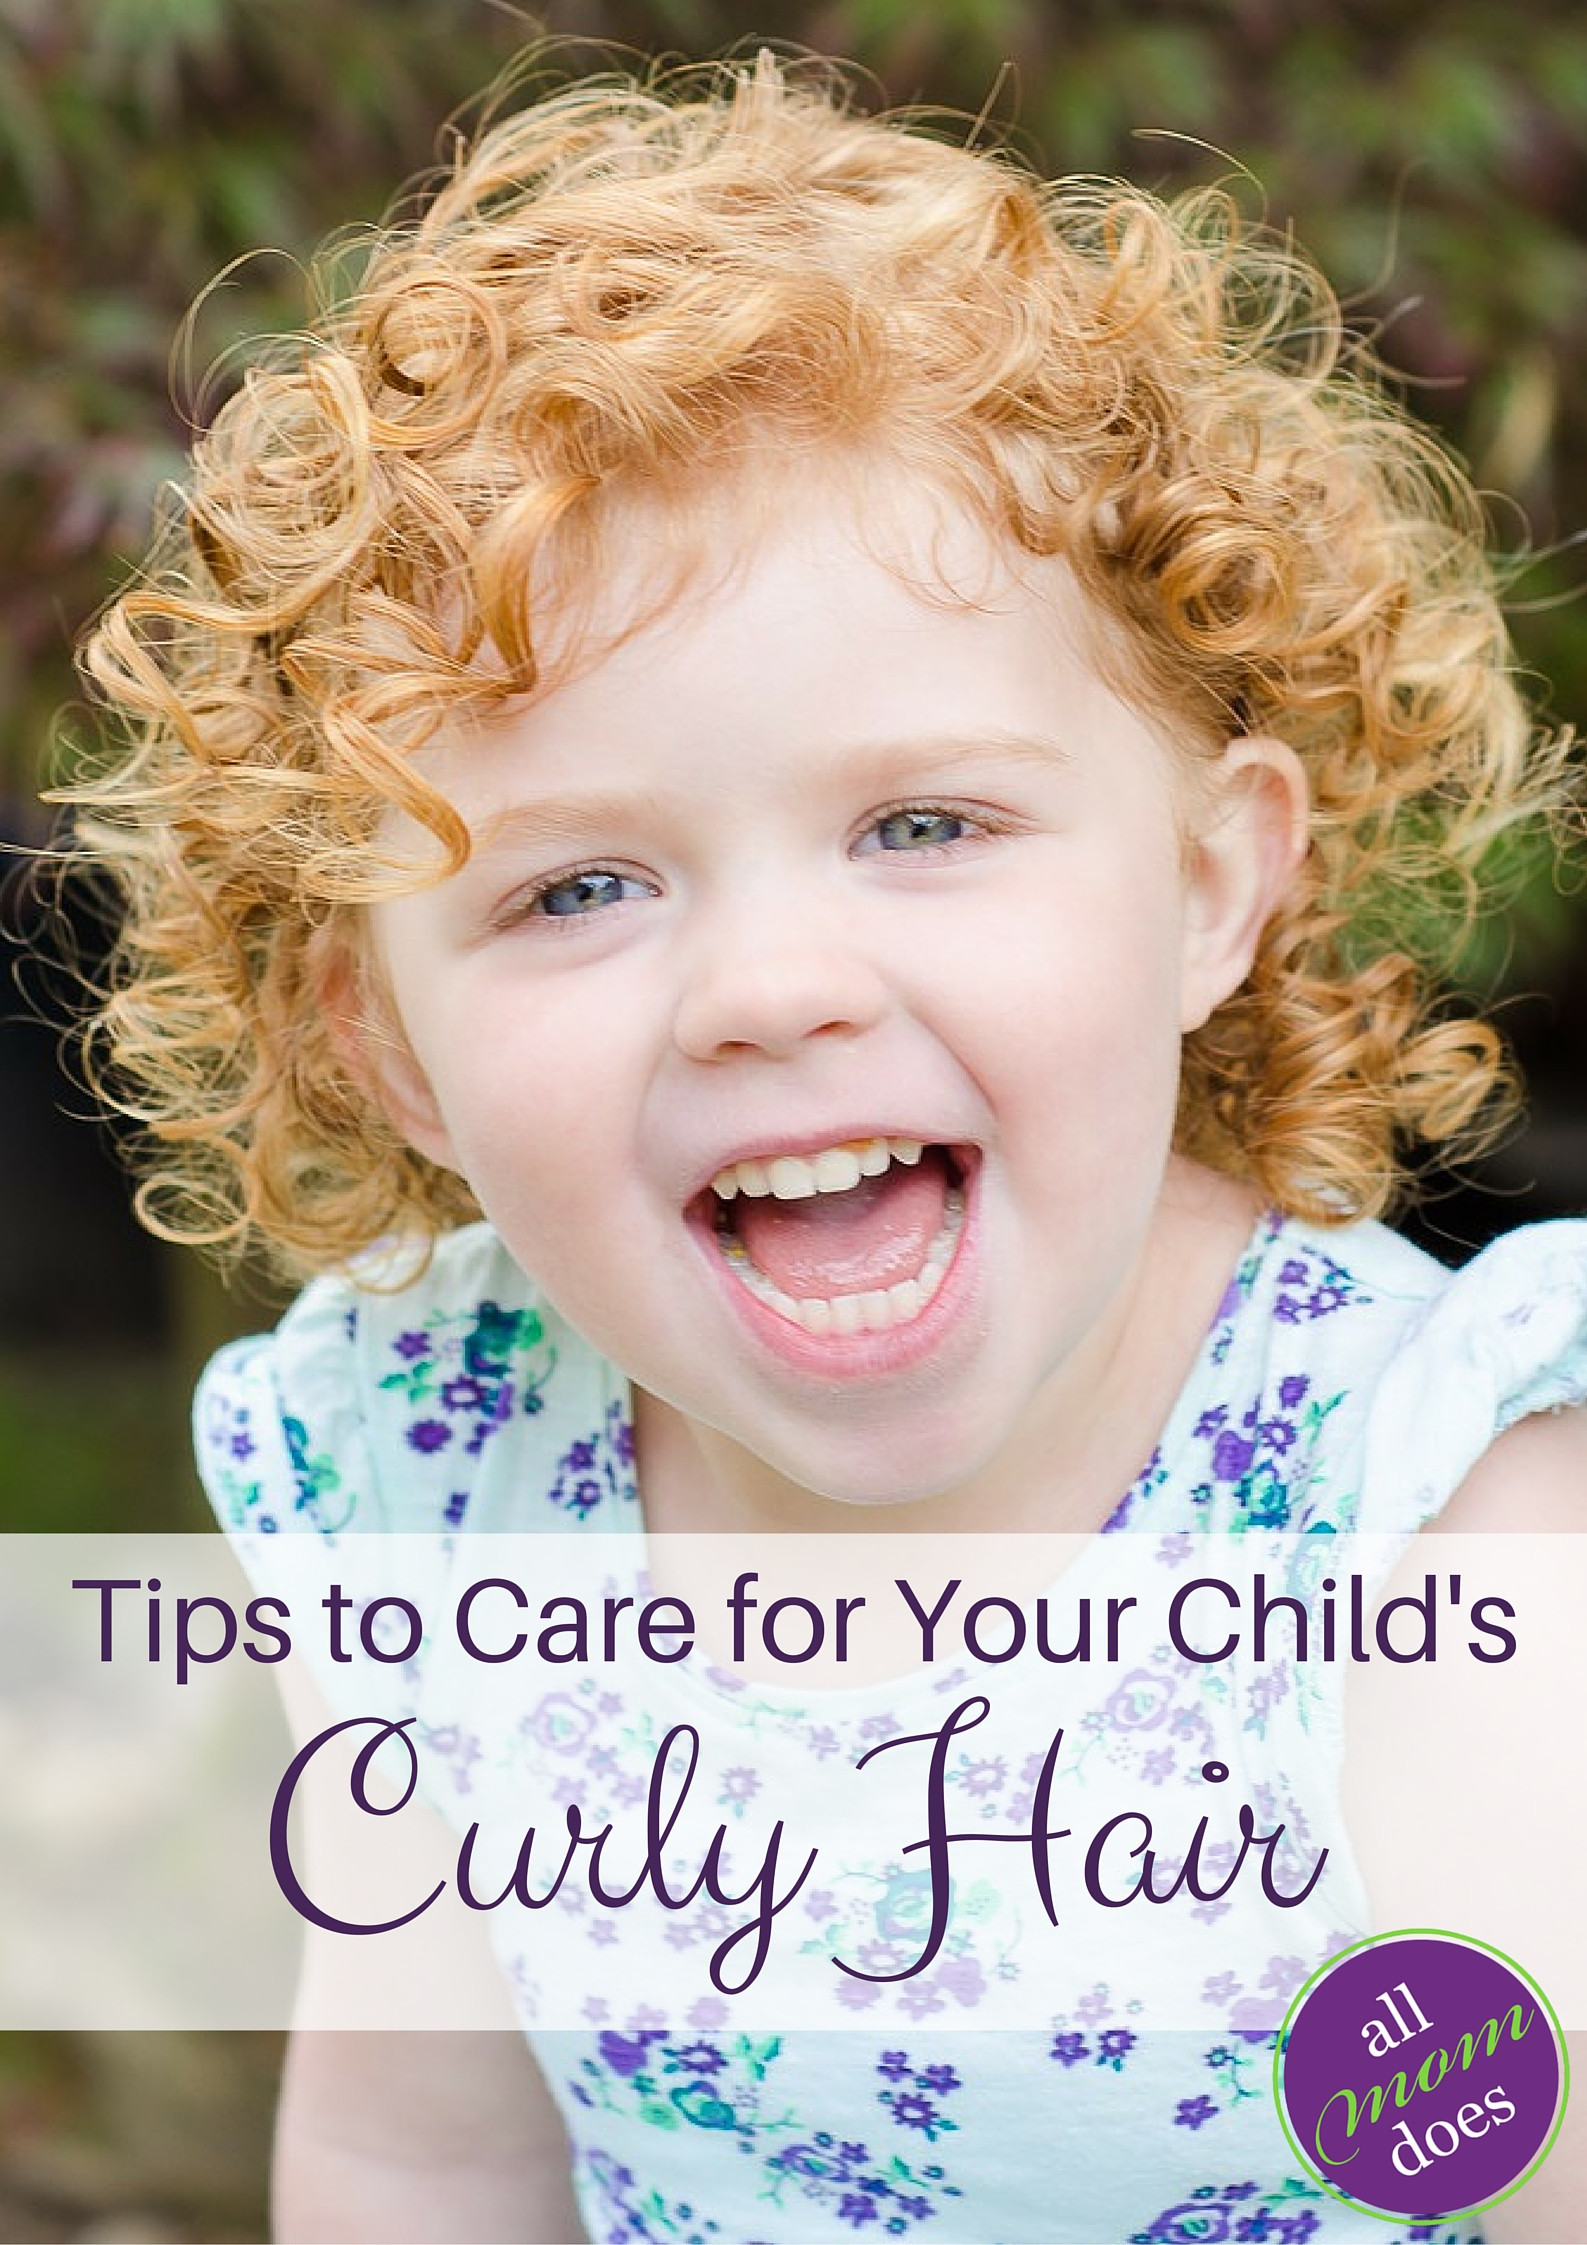 Curly Hair Kids
 Tips to Care for Your Child’s Curly Hair